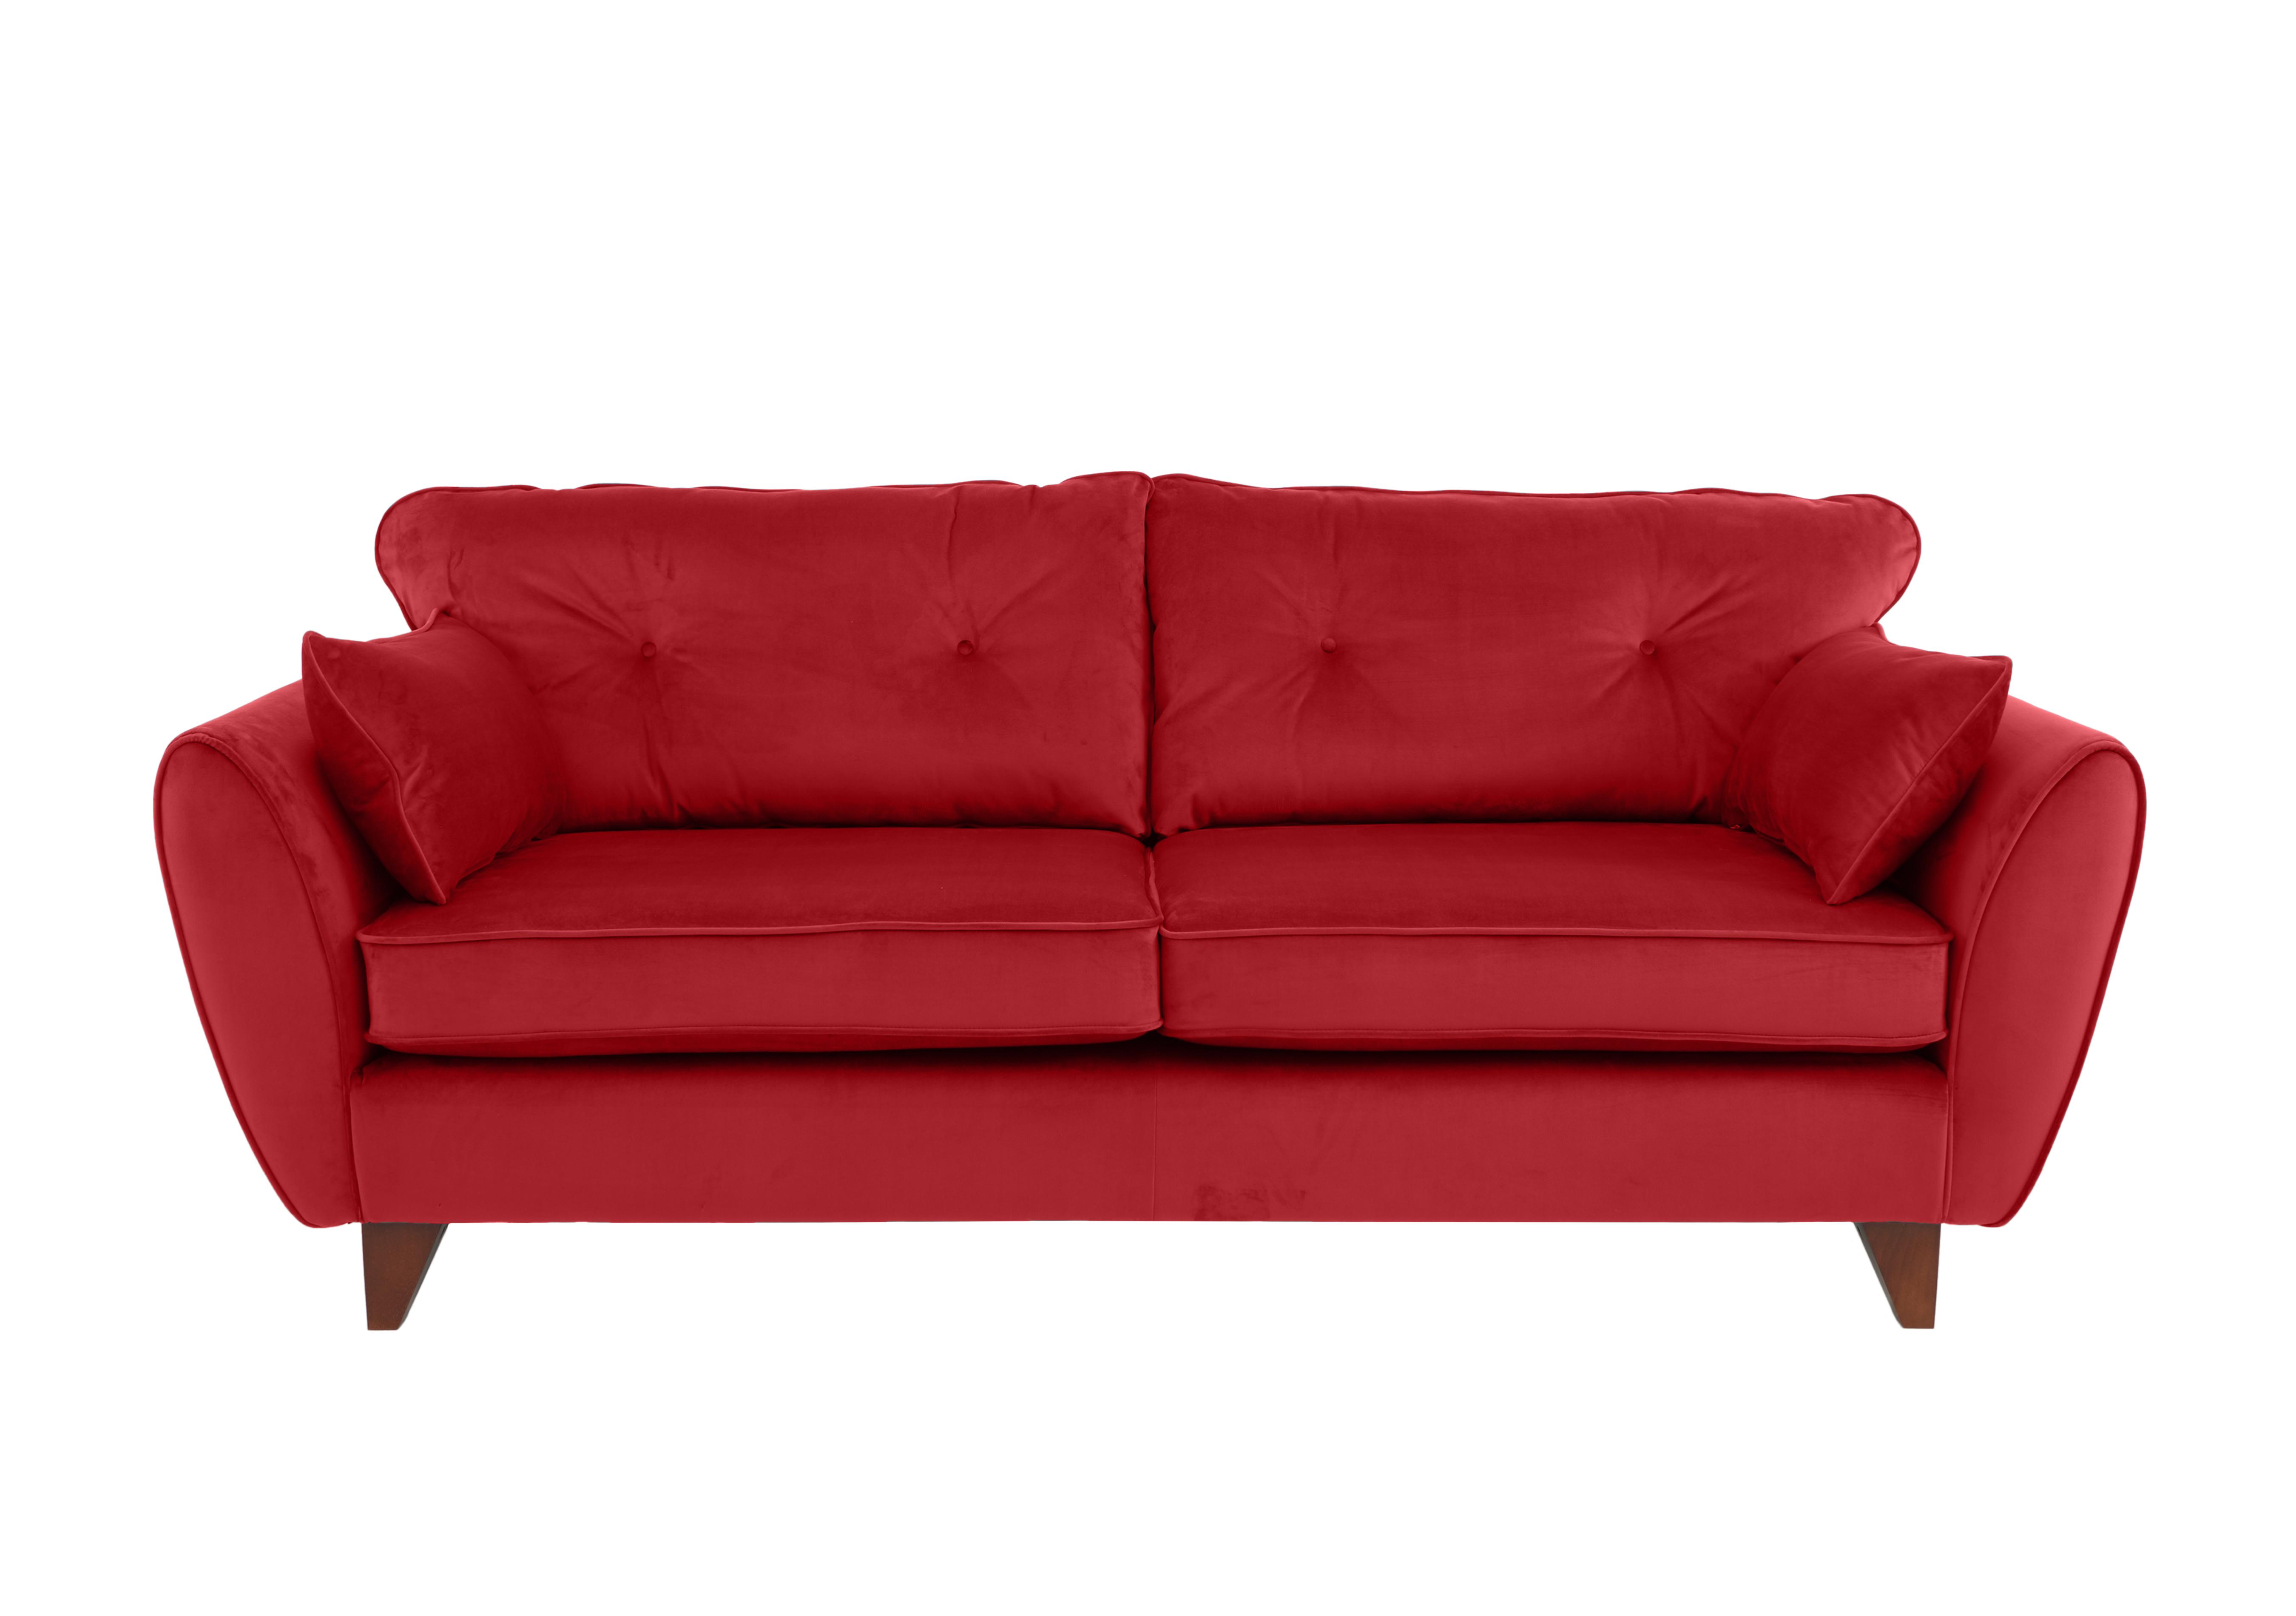 Felix 4 Seater Fabric Sofa in Red on Furniture Village